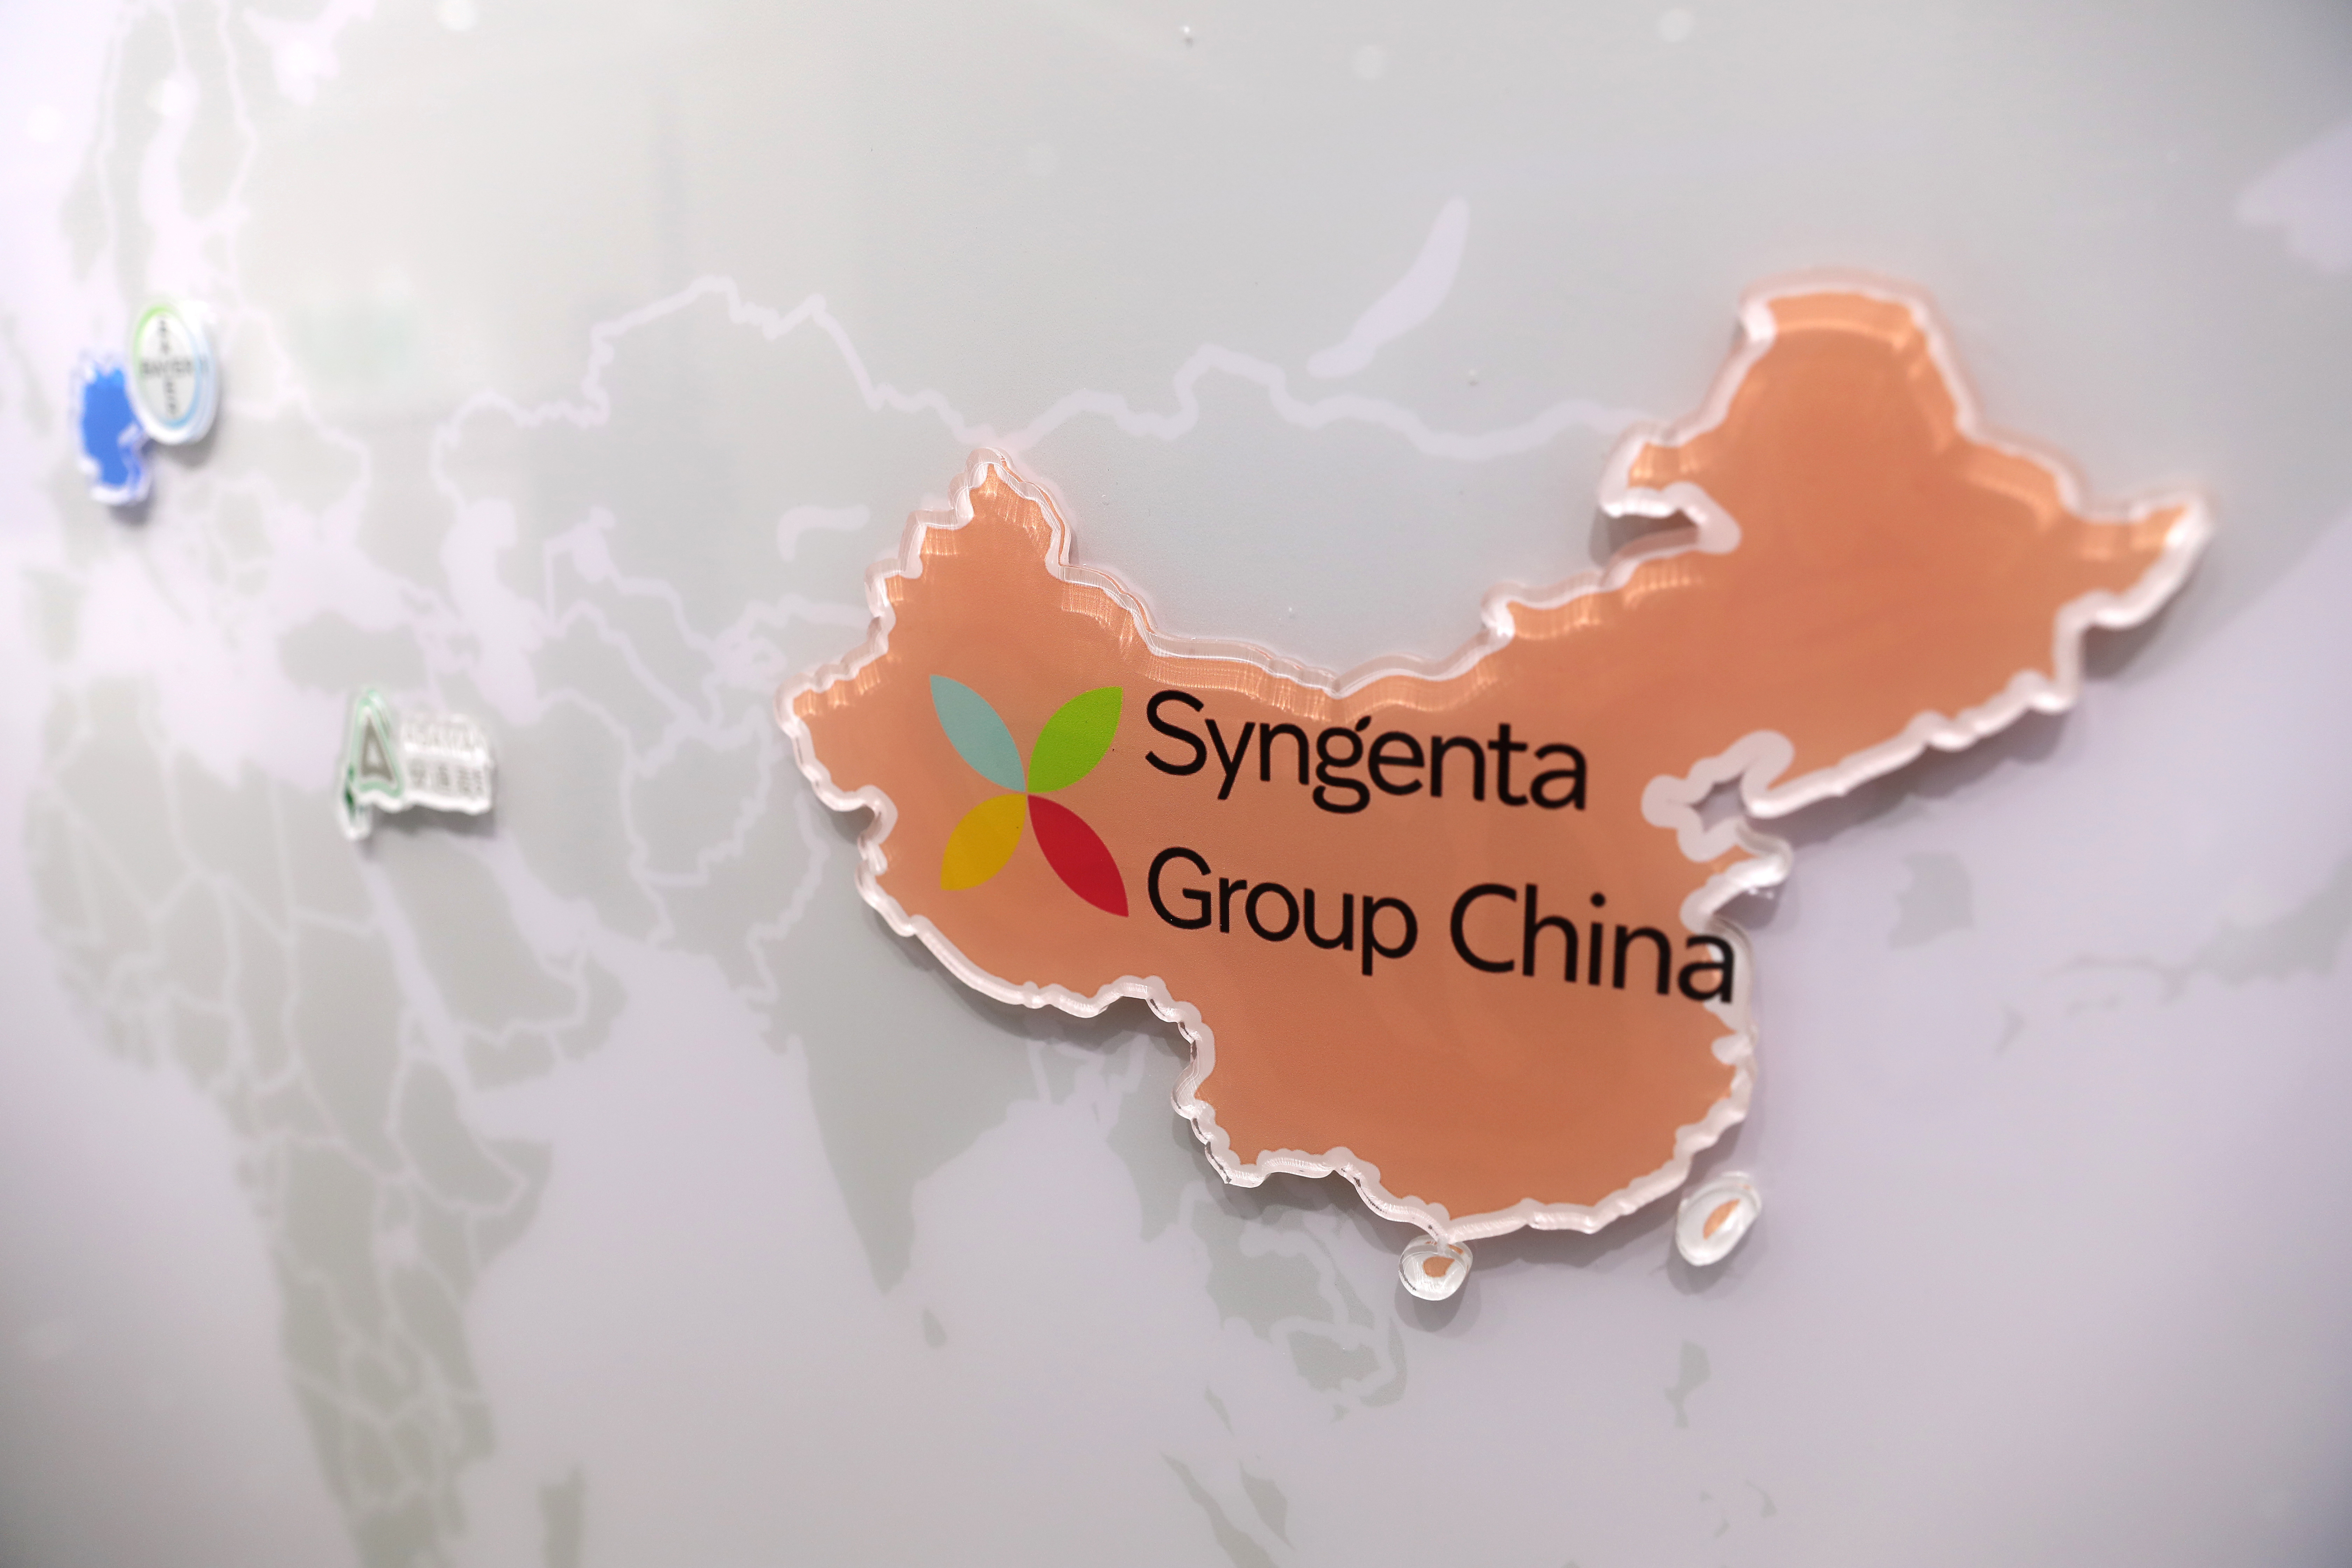 Media tour at "Syngenta Group China" in Wei county of Handan